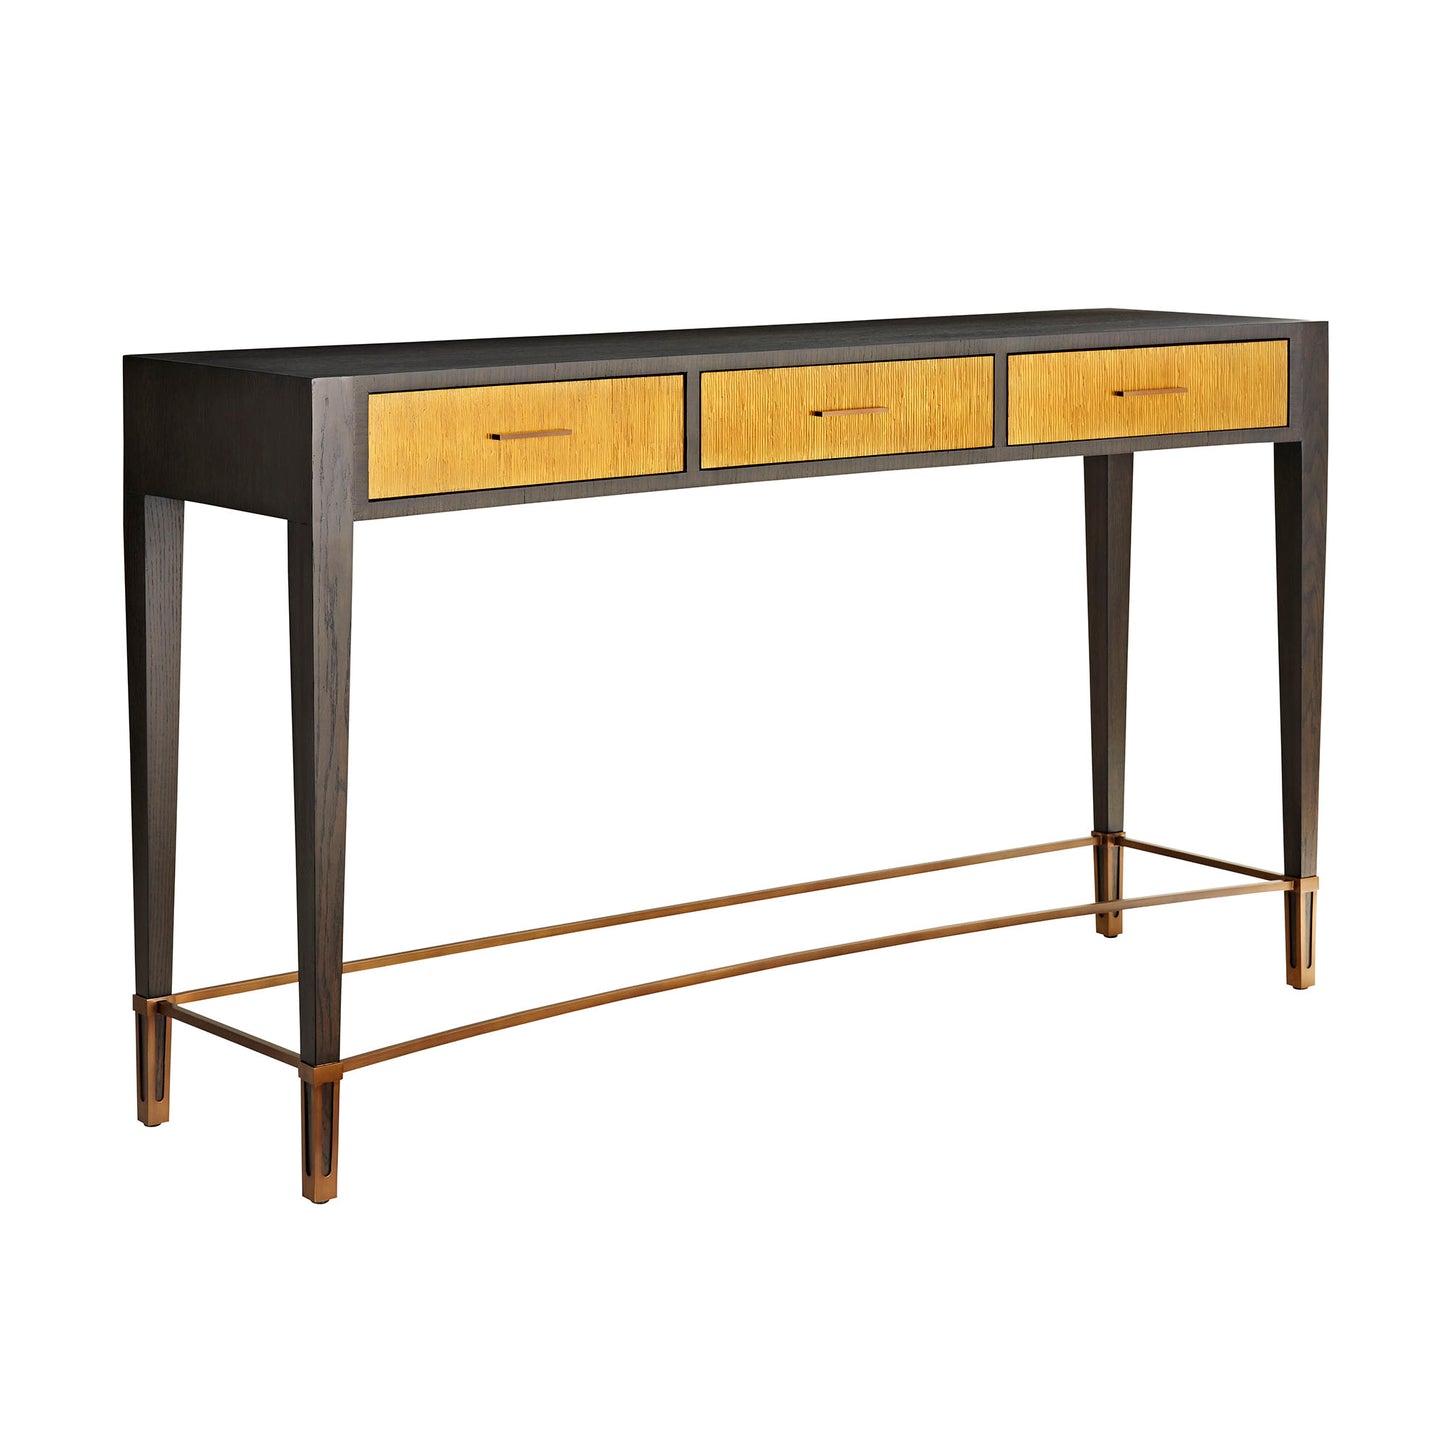 Lancaster Console - Ebony Toned Oak Veneer with Antique Brass Clad Drawer Fronts